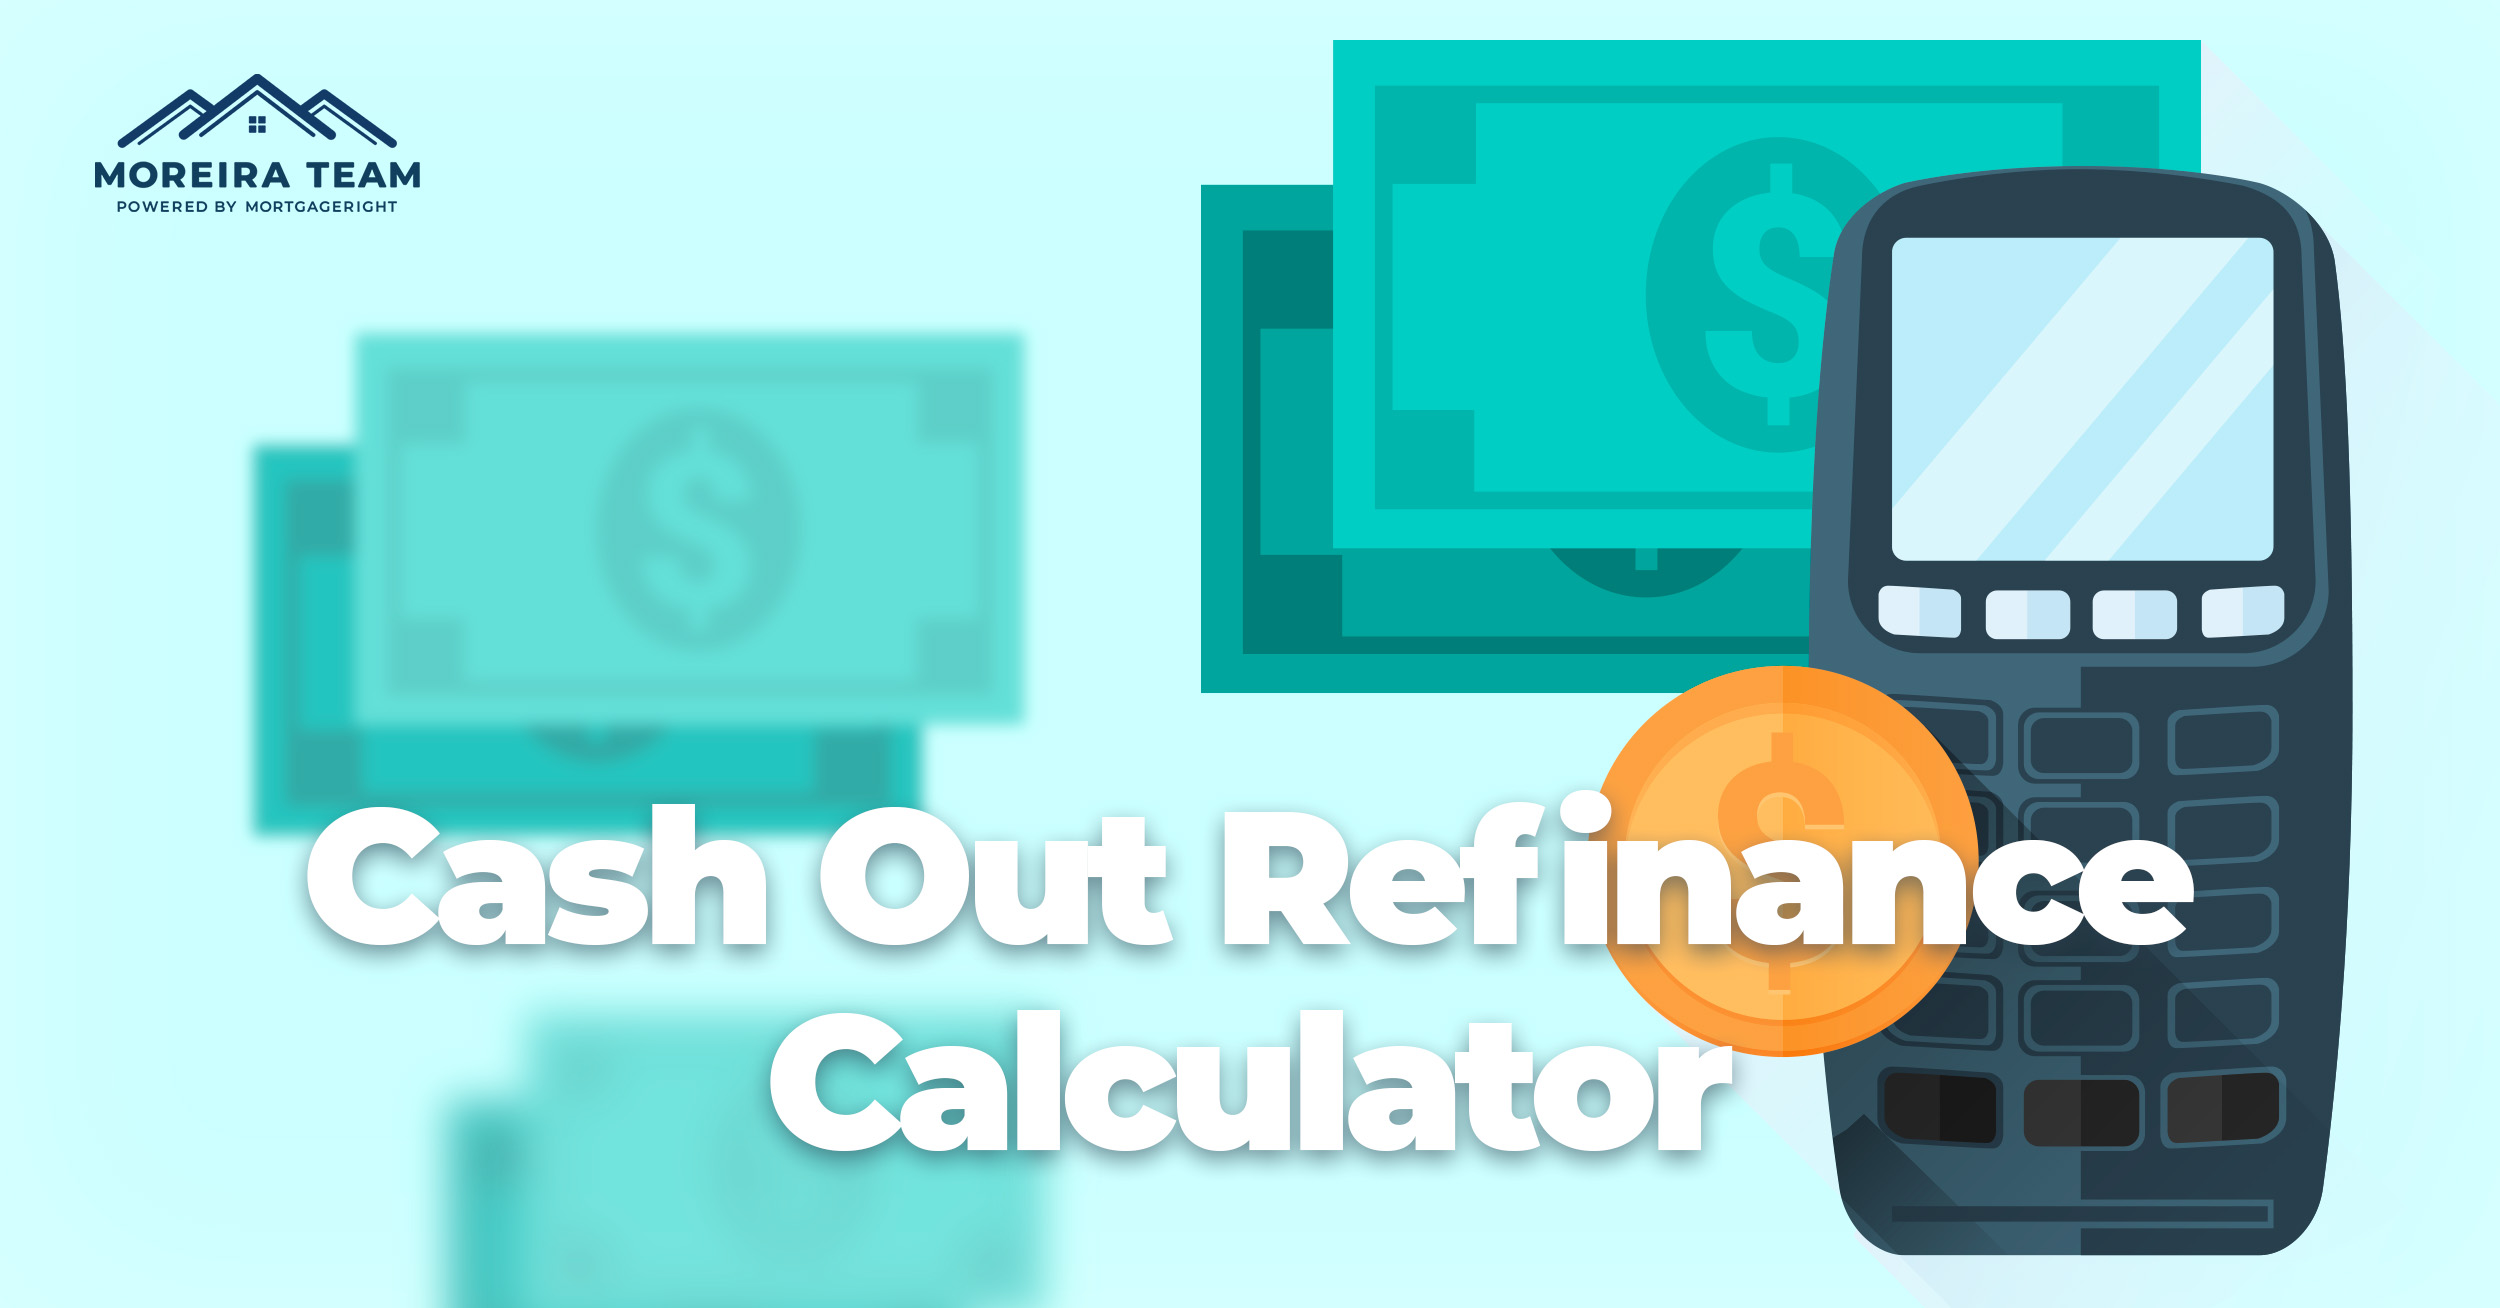 Cash Out Refinance Calculator: How Much Equity Can I Cash Out?